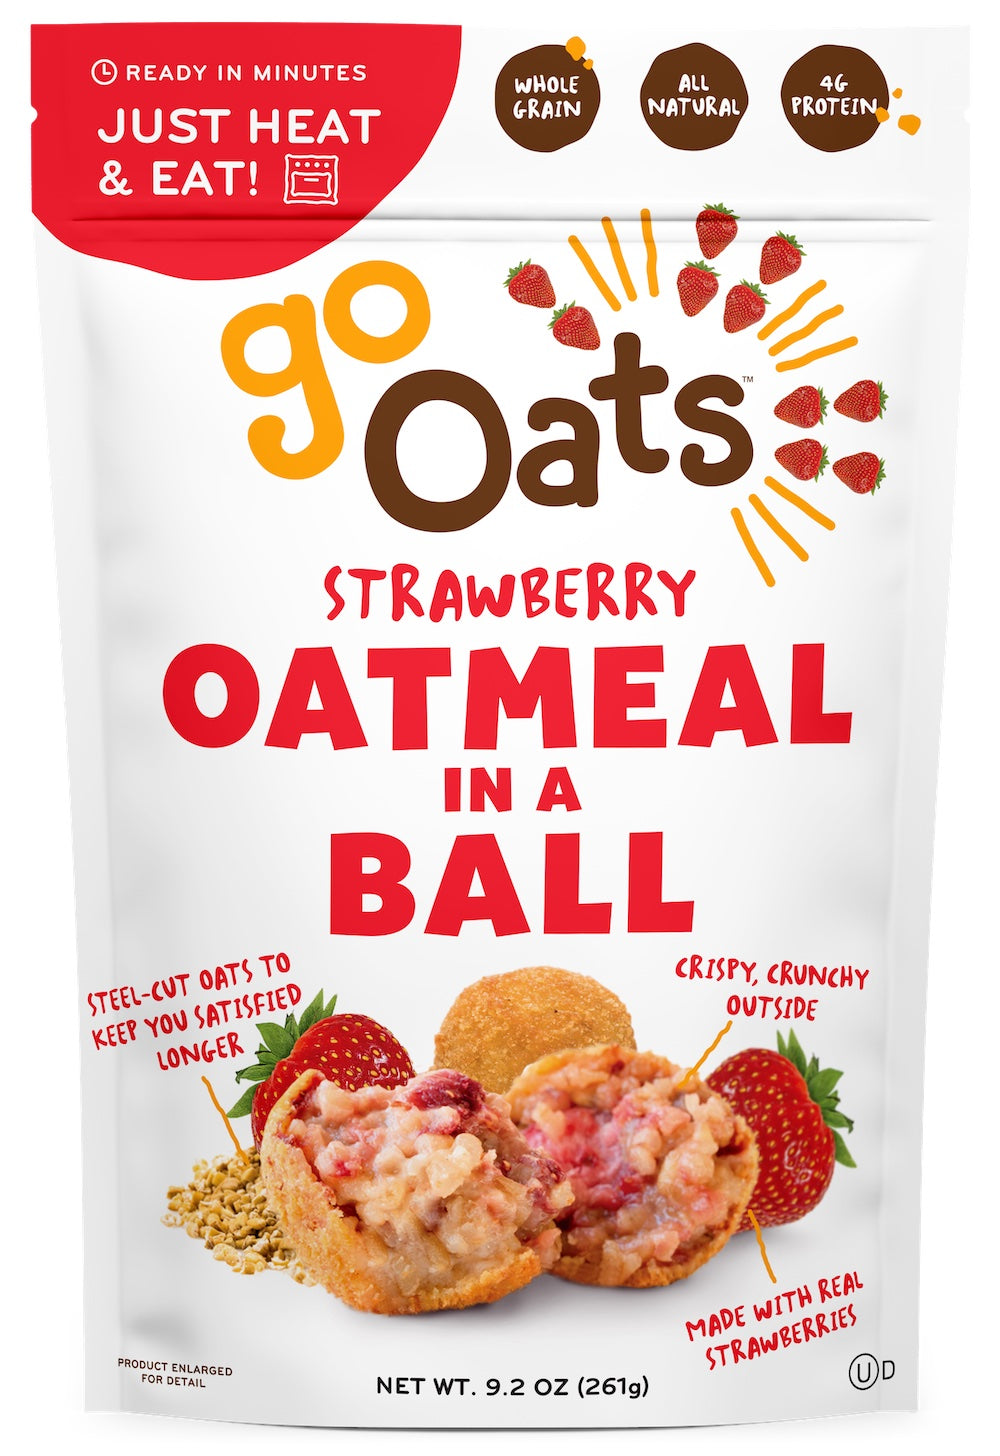 Strawberry Oatmeal in a Ball